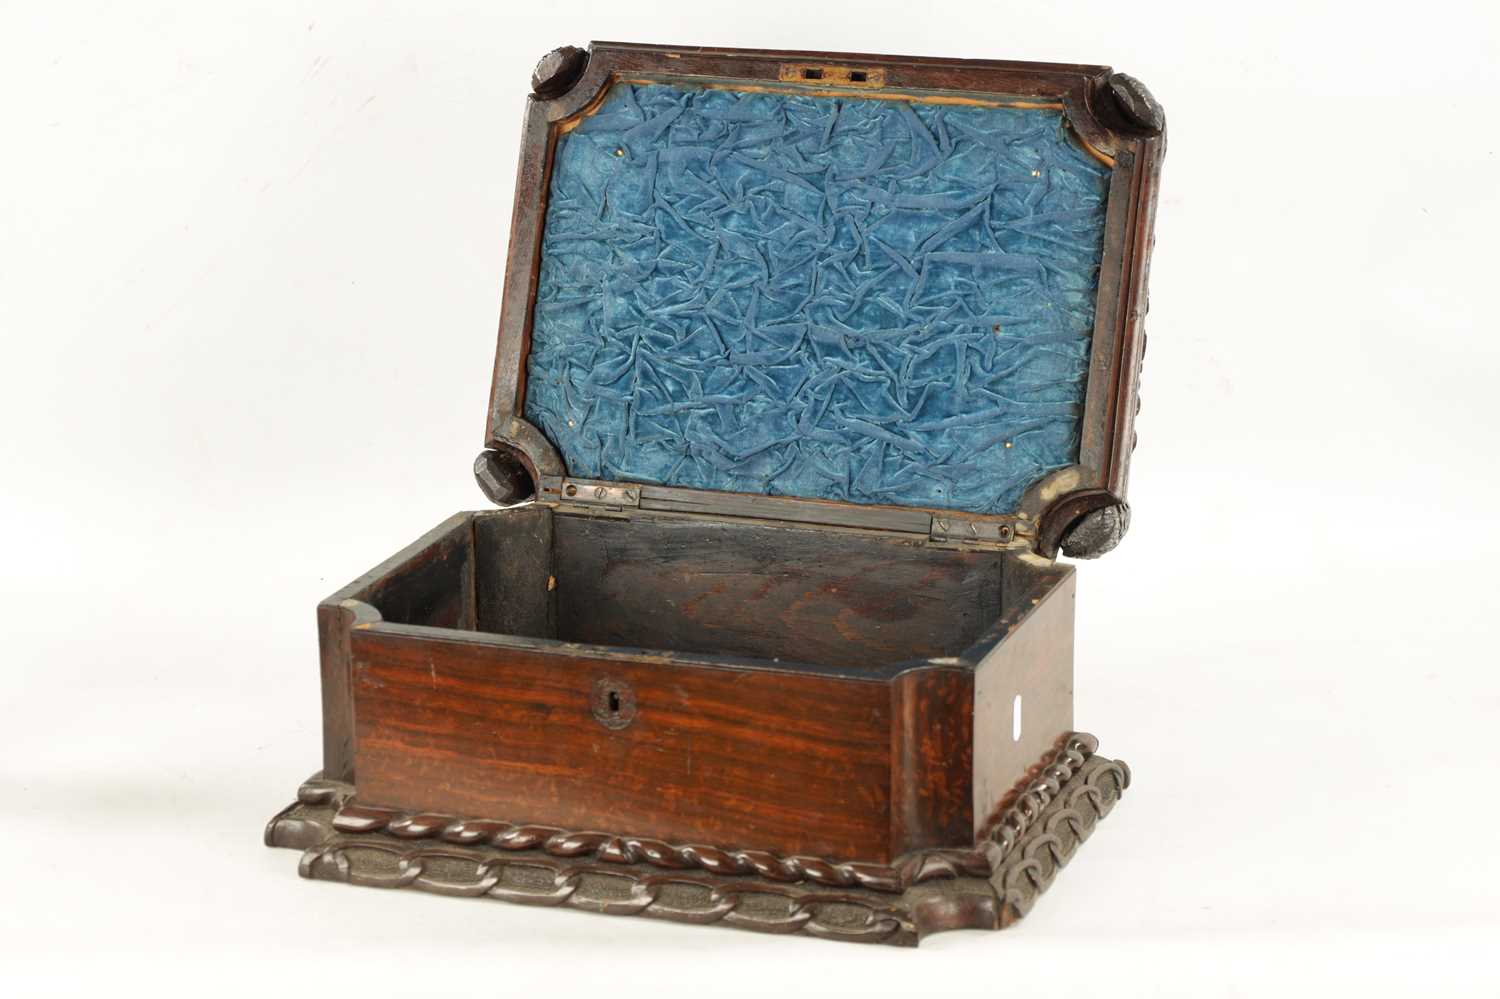 AN IMPRESSIVE 18TH CENTURY CONTINENTAL CARVED HARDWOOD TABLE CASKET - Image 5 of 6